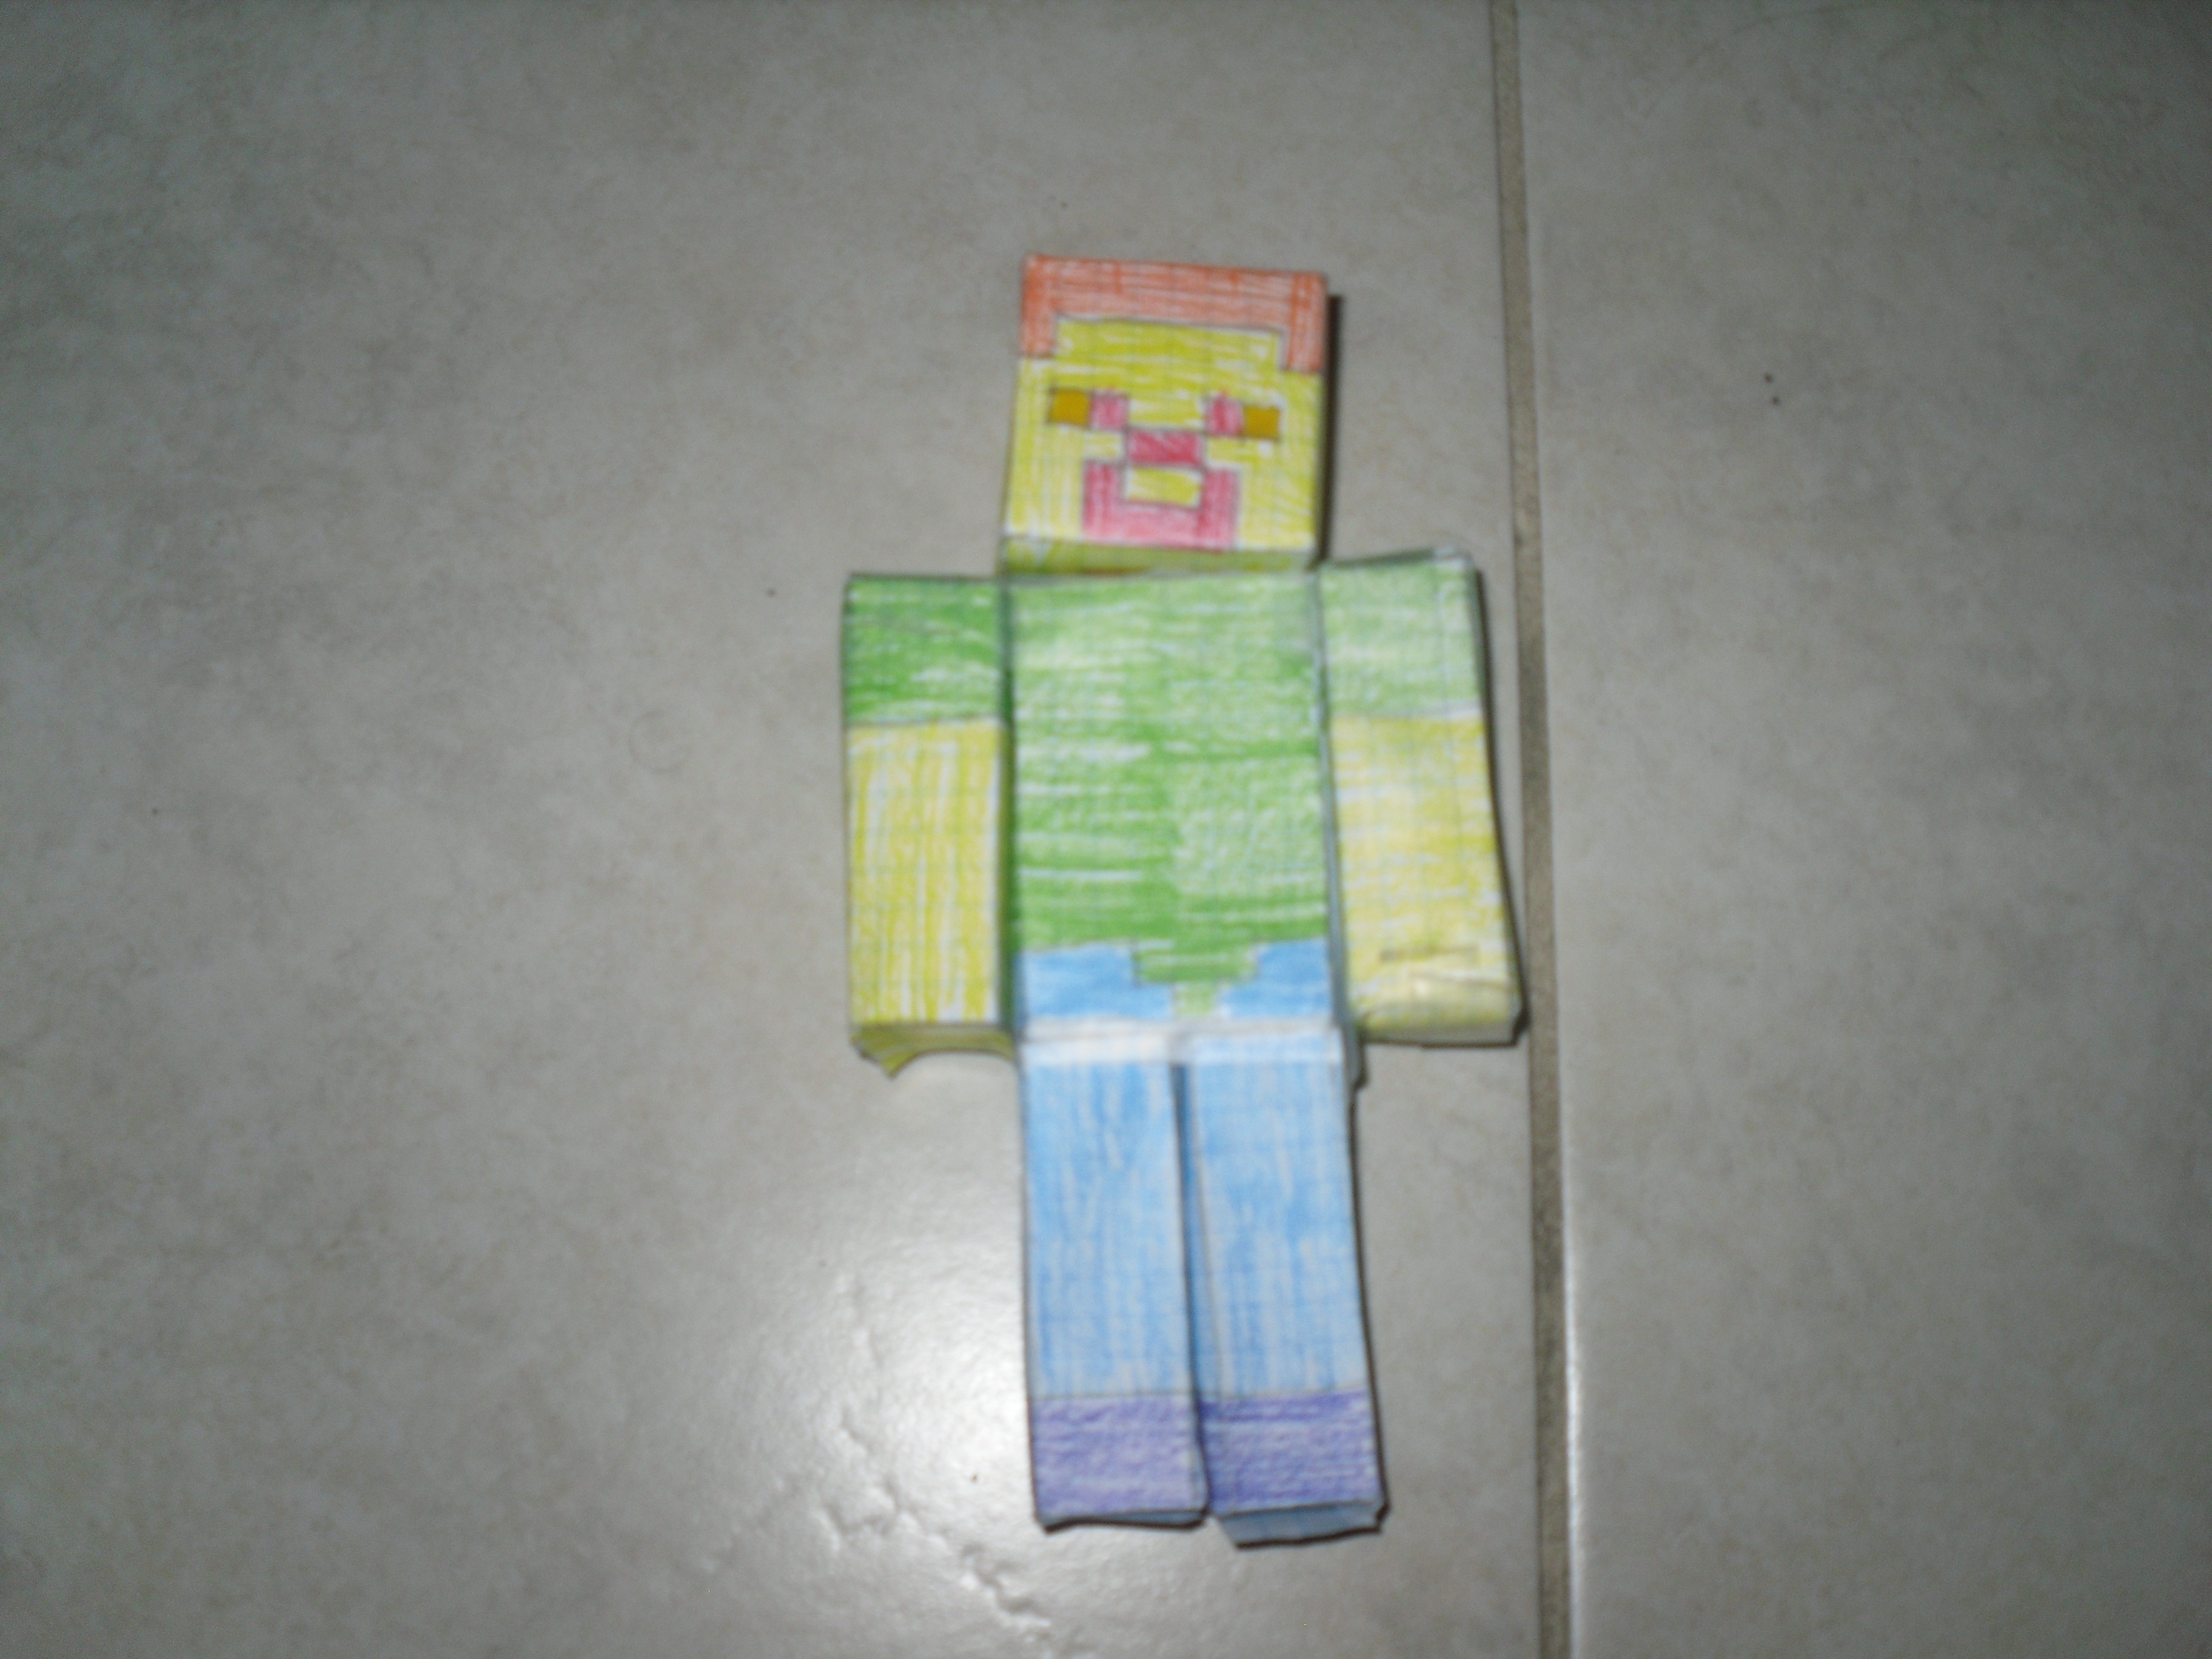 Paper Craft Version Of My Current Skin!